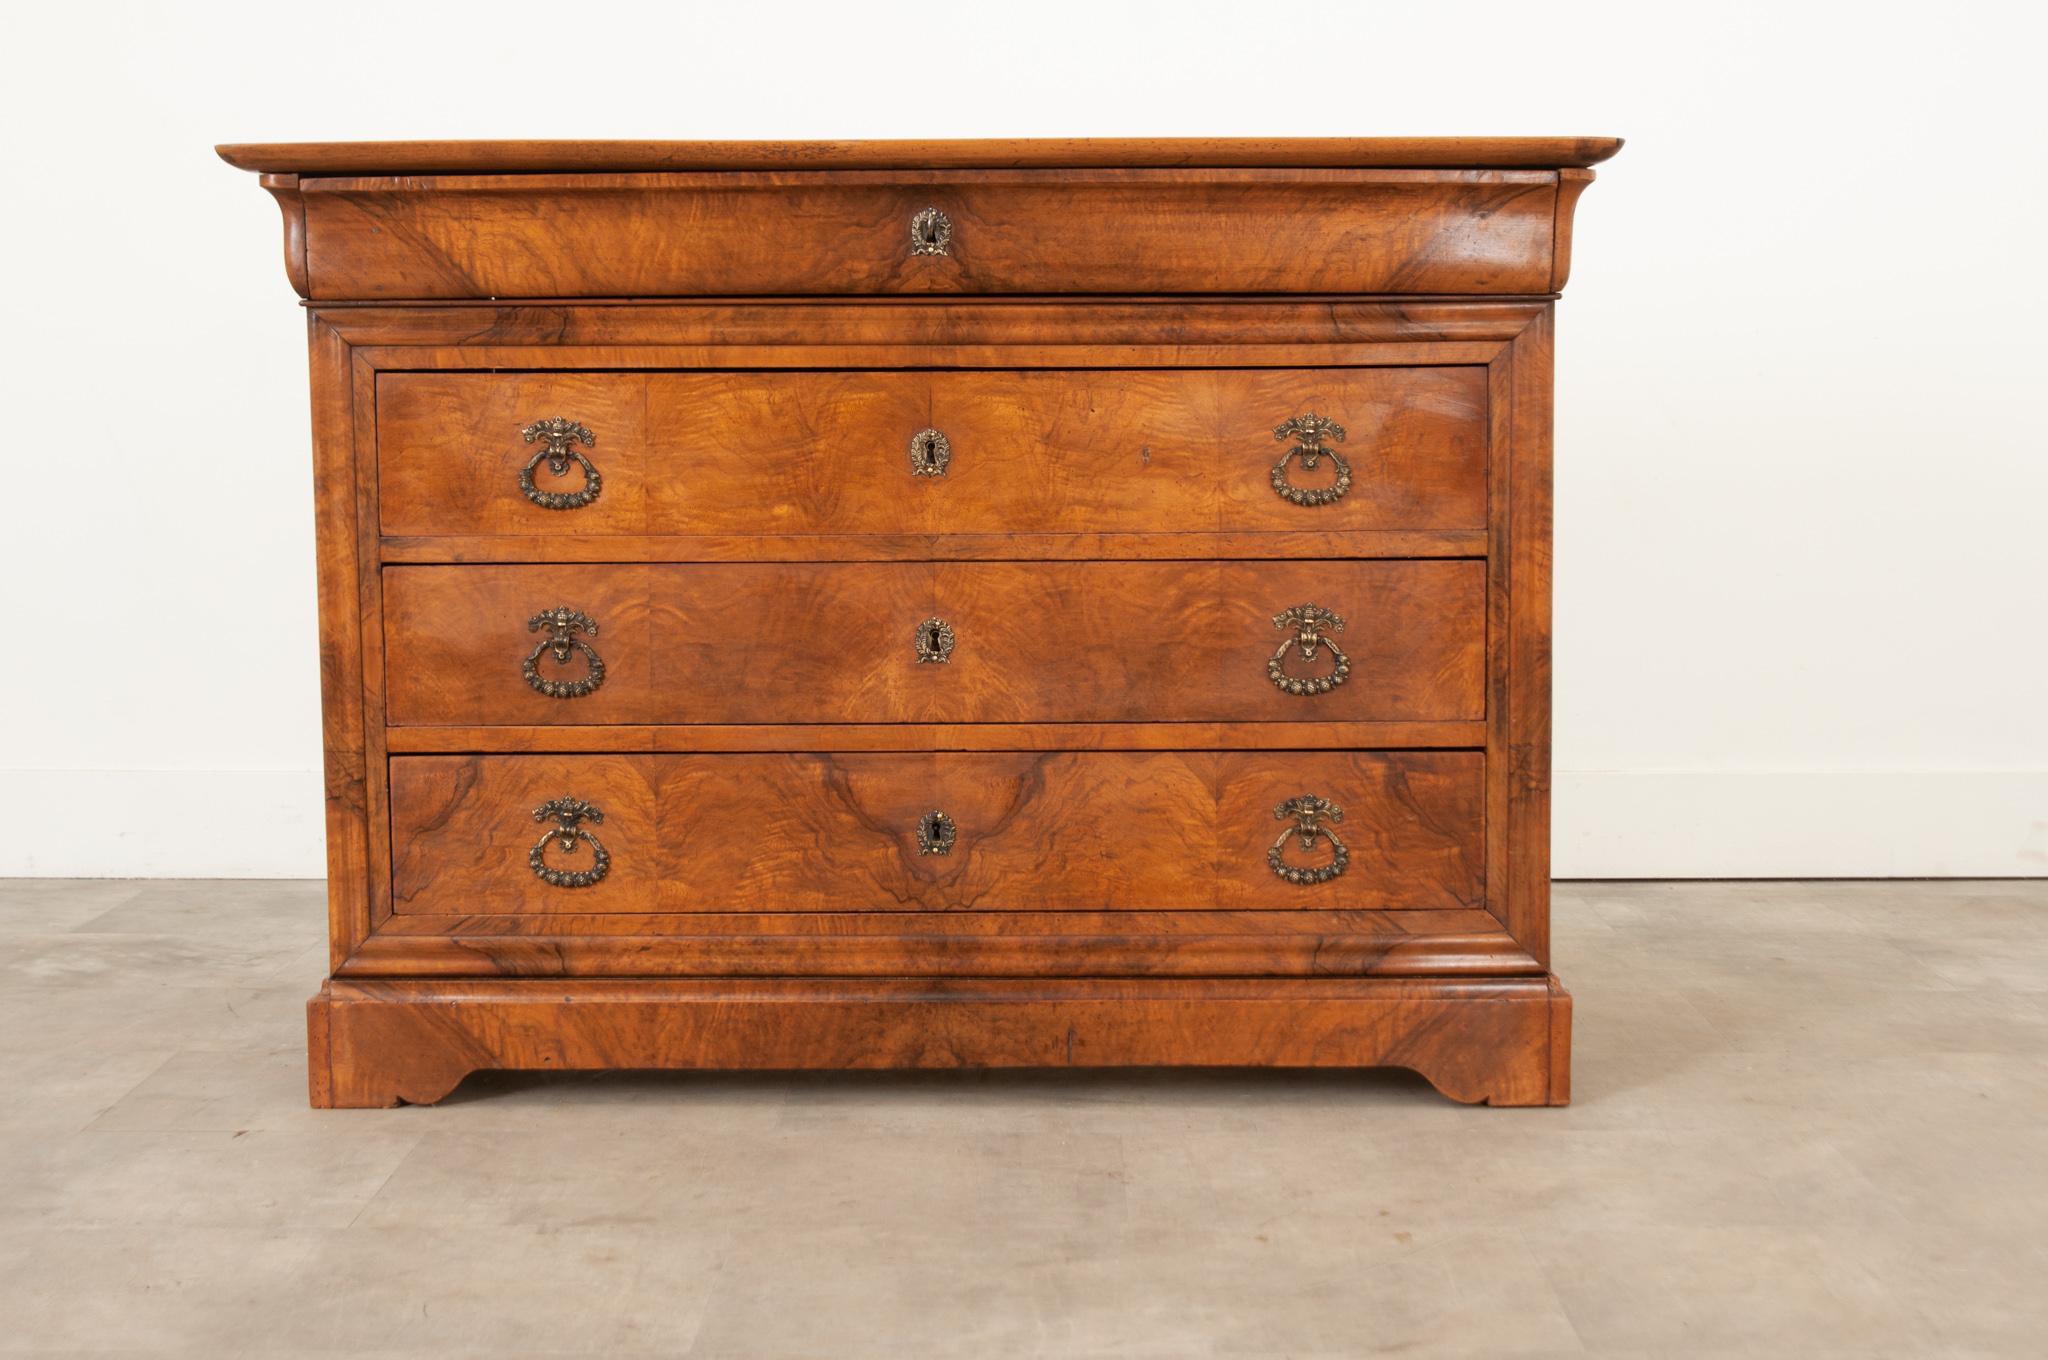 A French Louis Philippe burl and bookmatched mahogany commode is in wonderful antique condition. There are four working locks surrounded with gilt bronze escutcheons, 1 key is used for all locks. Three of the large drawers have recently added Empire